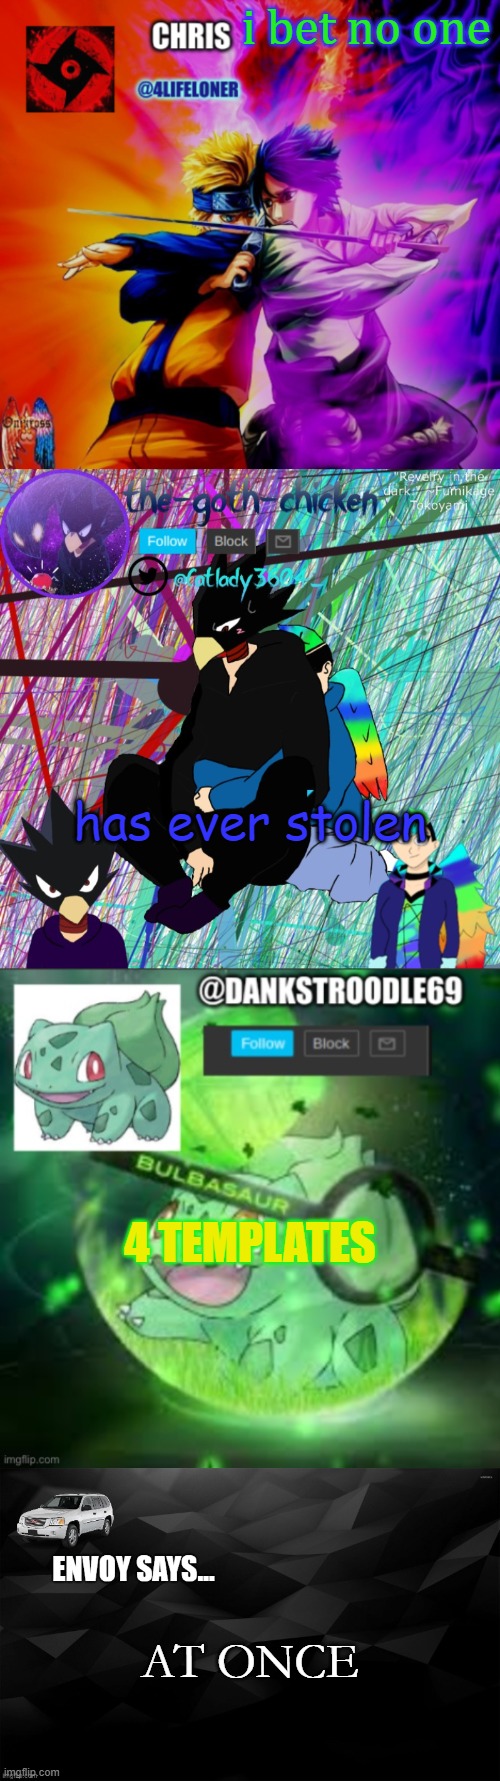 i bet no one; has ever stolen; 4 TEMPLATES; AT ONCE | image tagged in chris naruto announcement,lol you found it yay,dankstroodles new announcement,envoy says,stolen templates | made w/ Imgflip meme maker